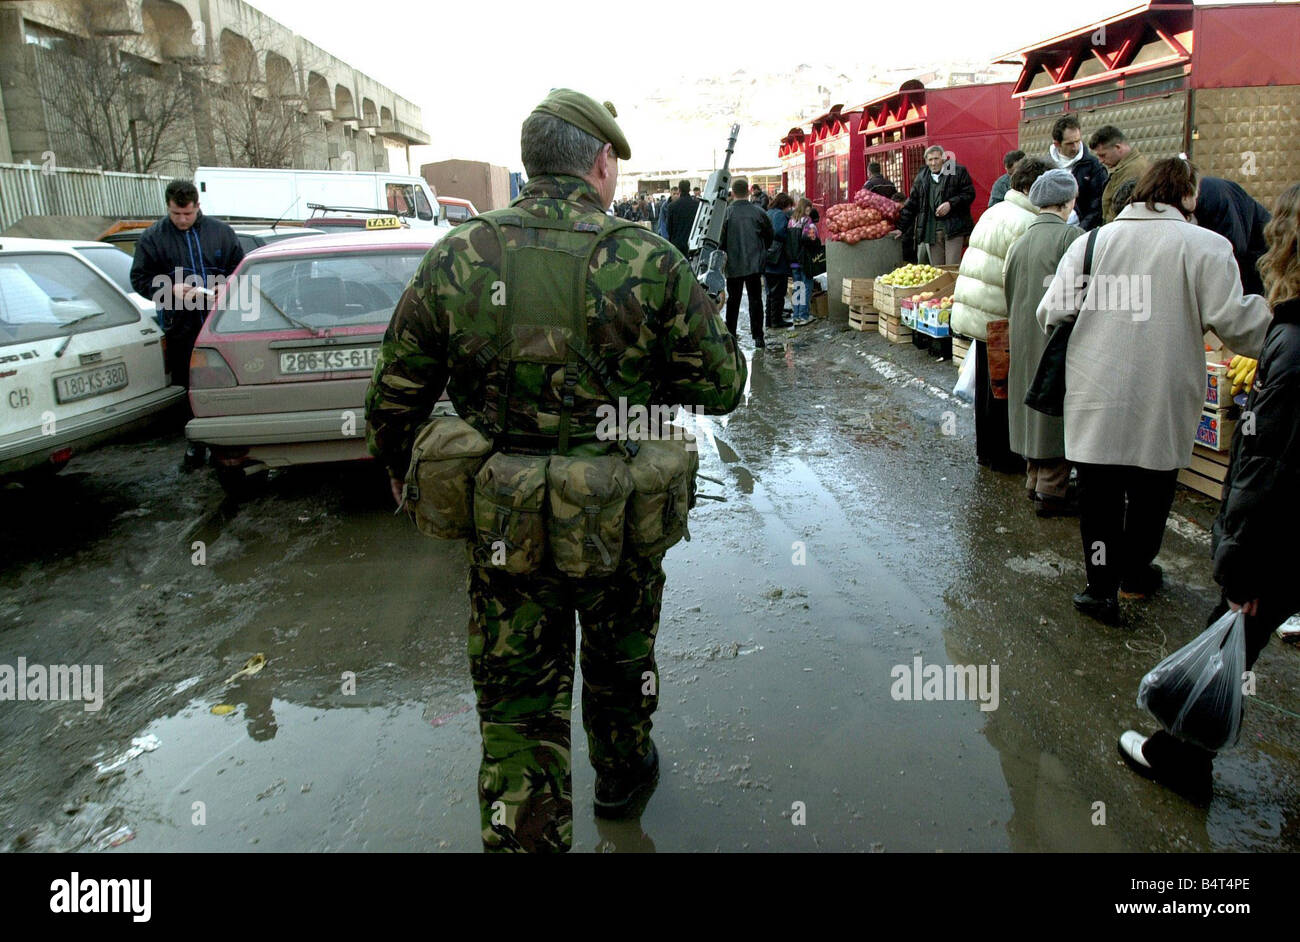 Queens Royal Hussars duty in Kosovo as apart of the KFOR peace keeping mission Soldiers on patrol in the market palce Stock Photo